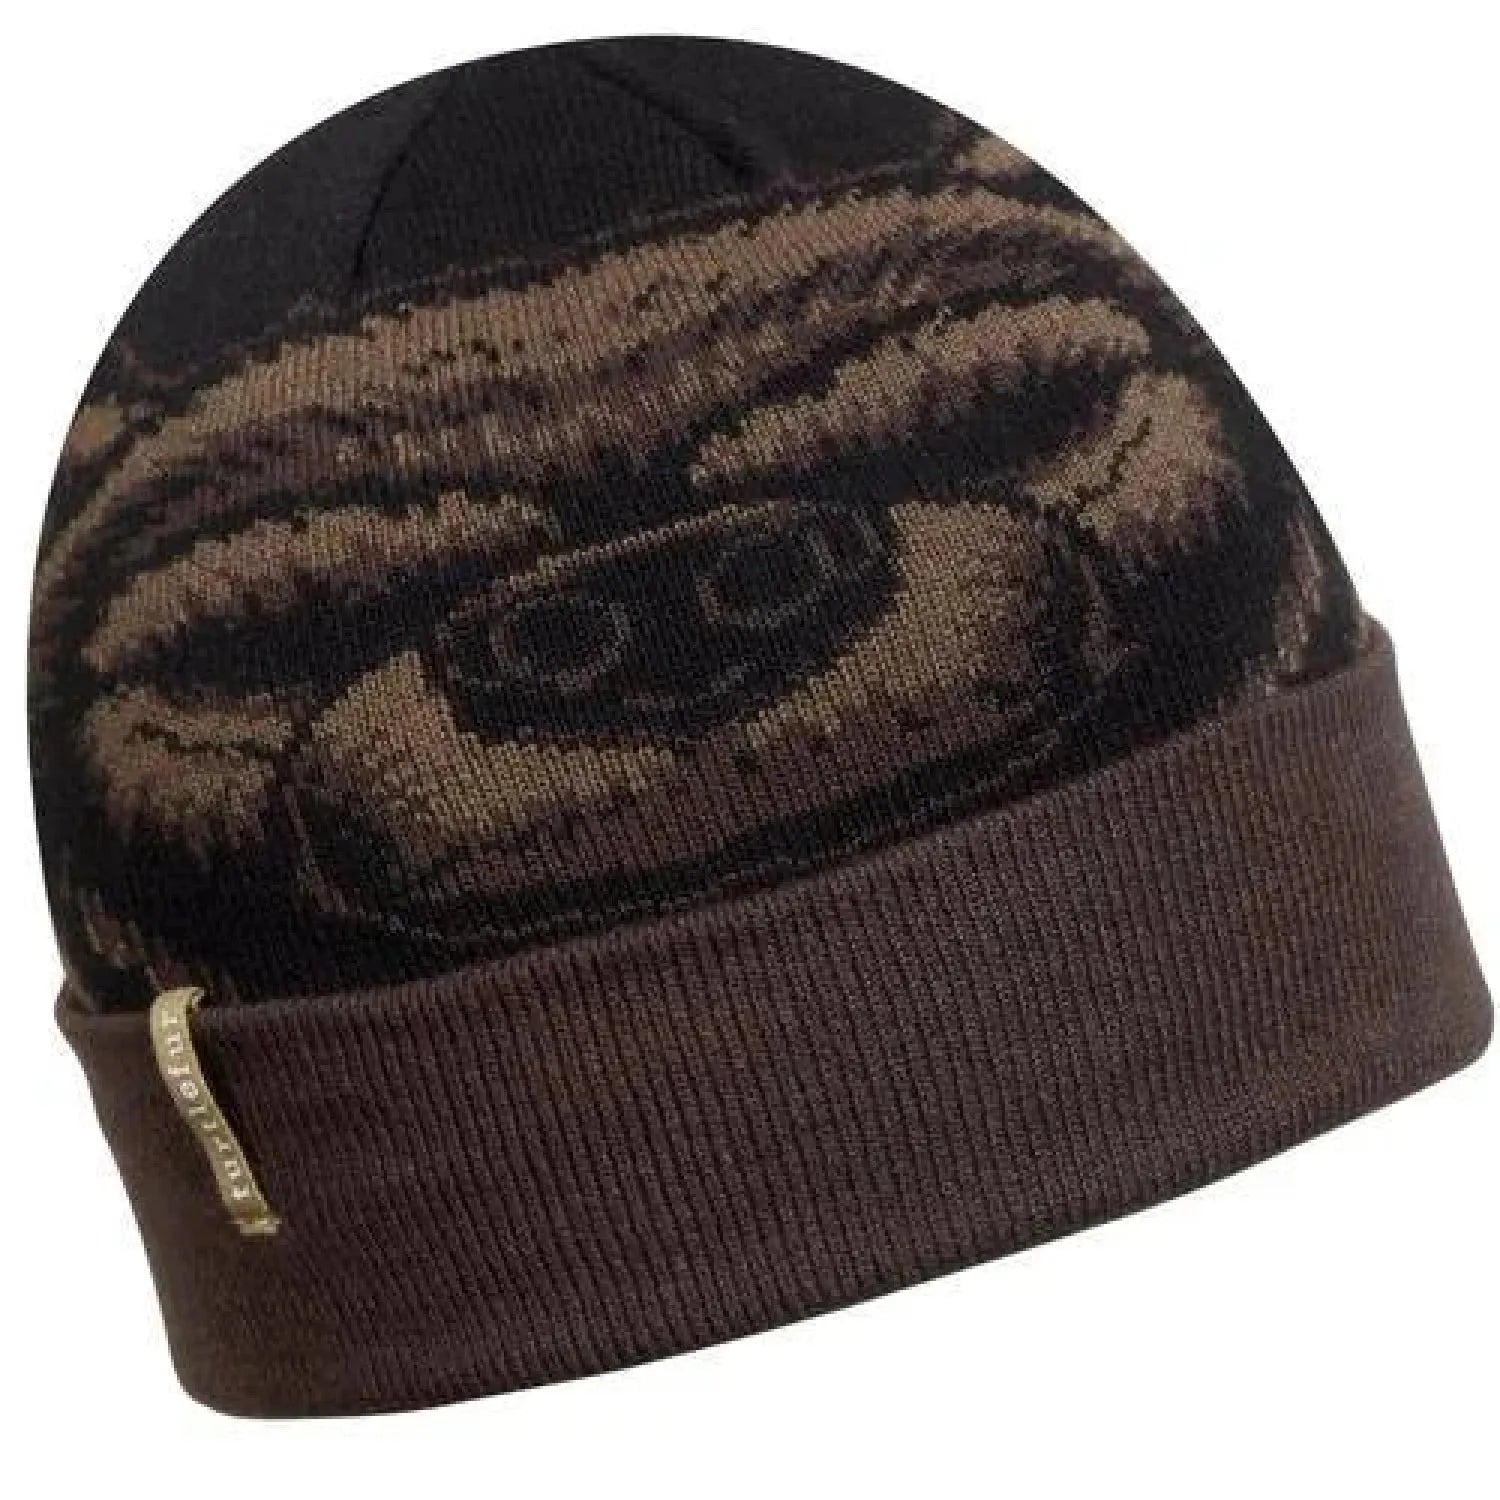 Turtle Fur Kid's Claw Hat shown in the Bear design option. Flat Front view.